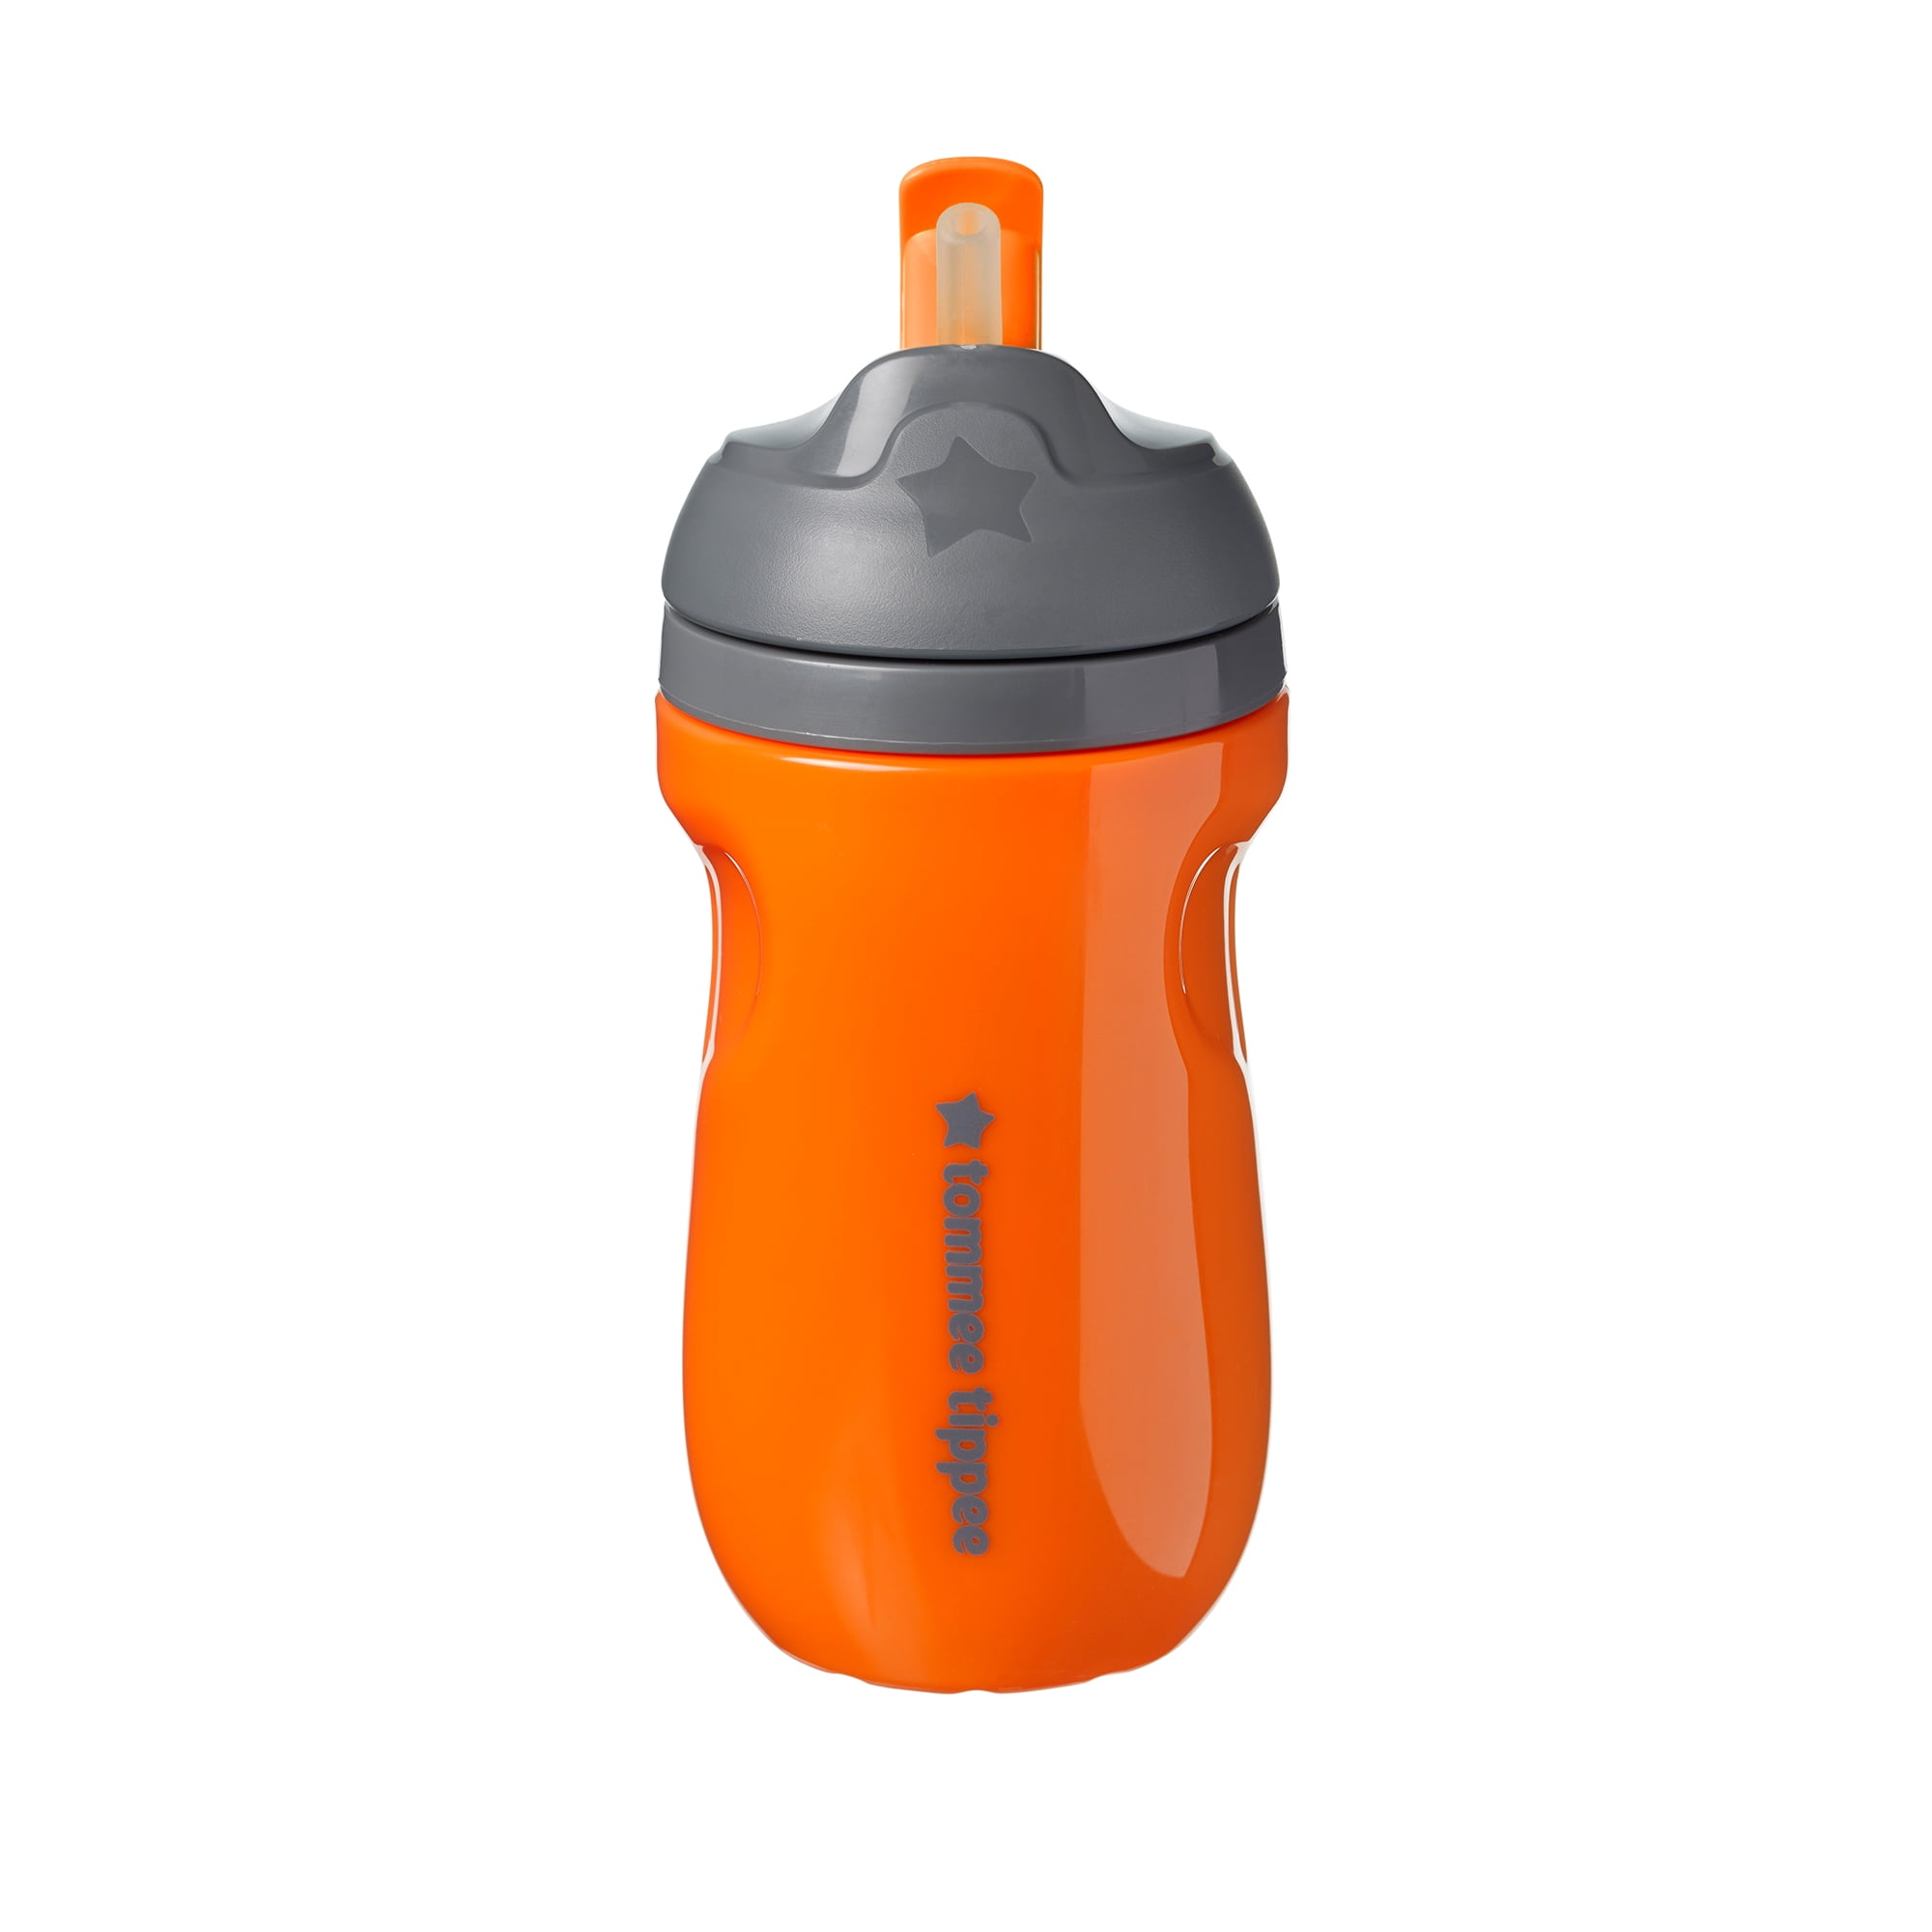 Tommee Tippee Closer to Nature Weaning Straw Cup 230ml